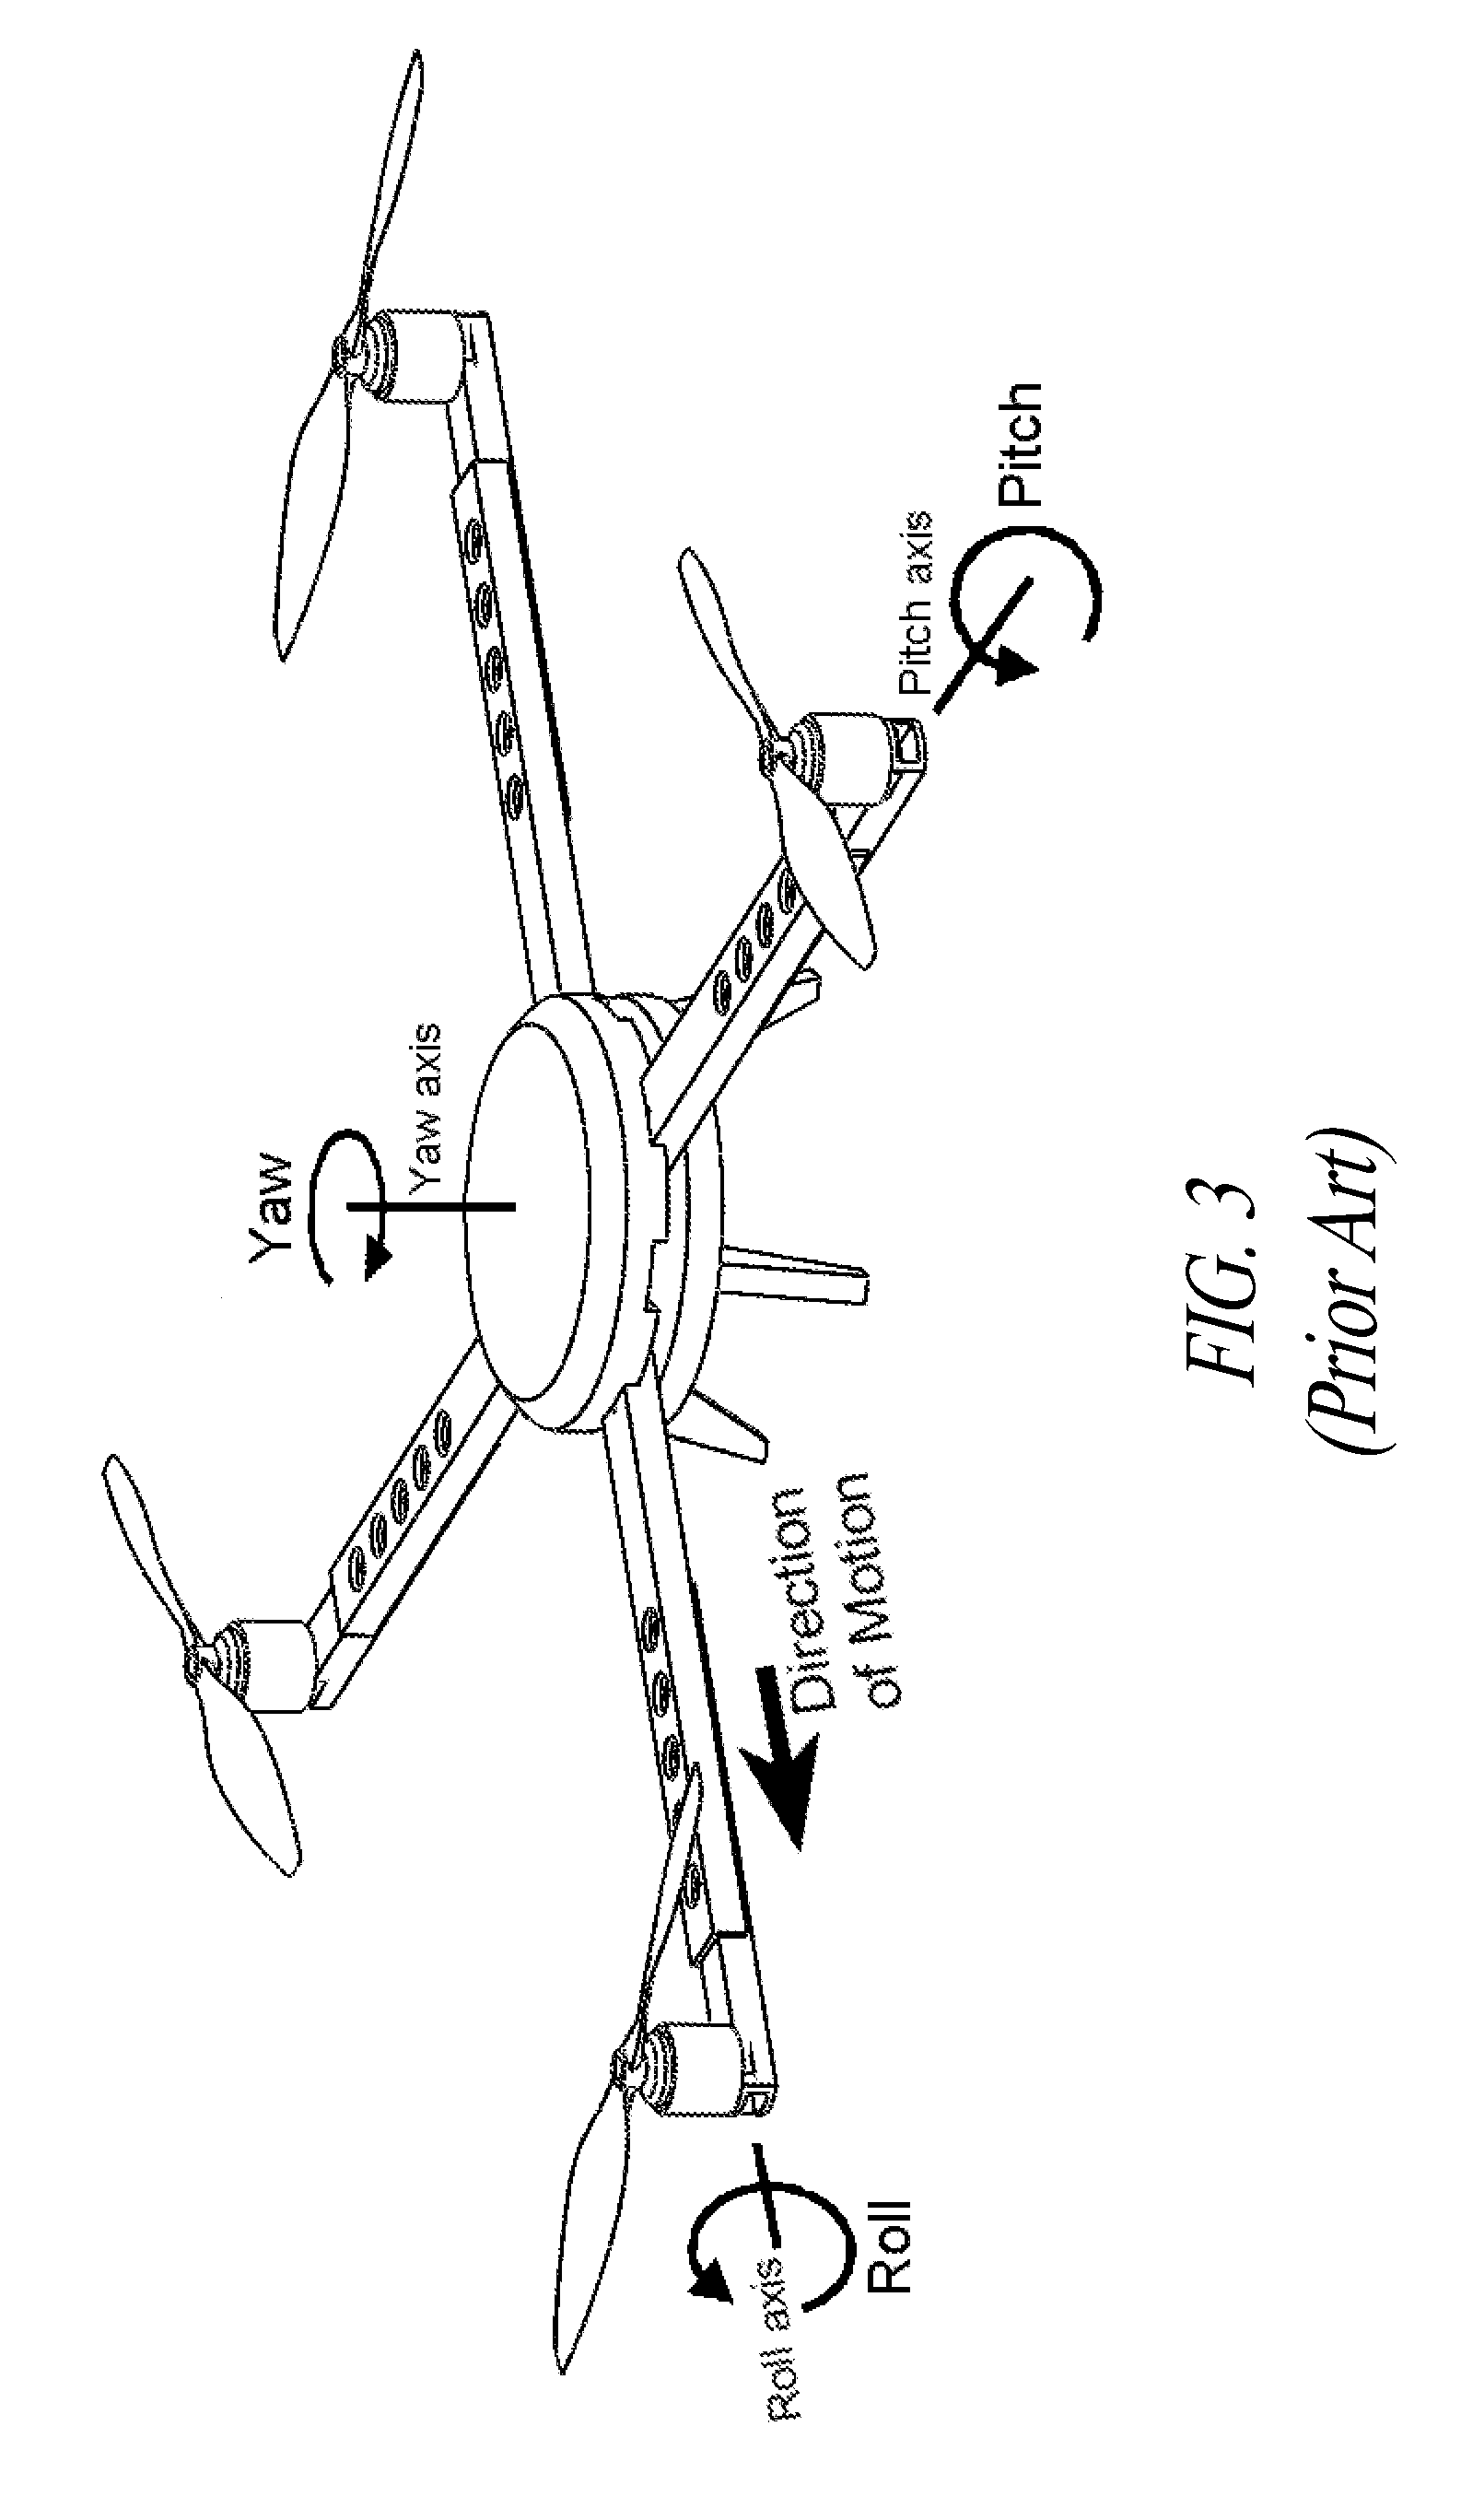 Multicopters with variable flight characteristics